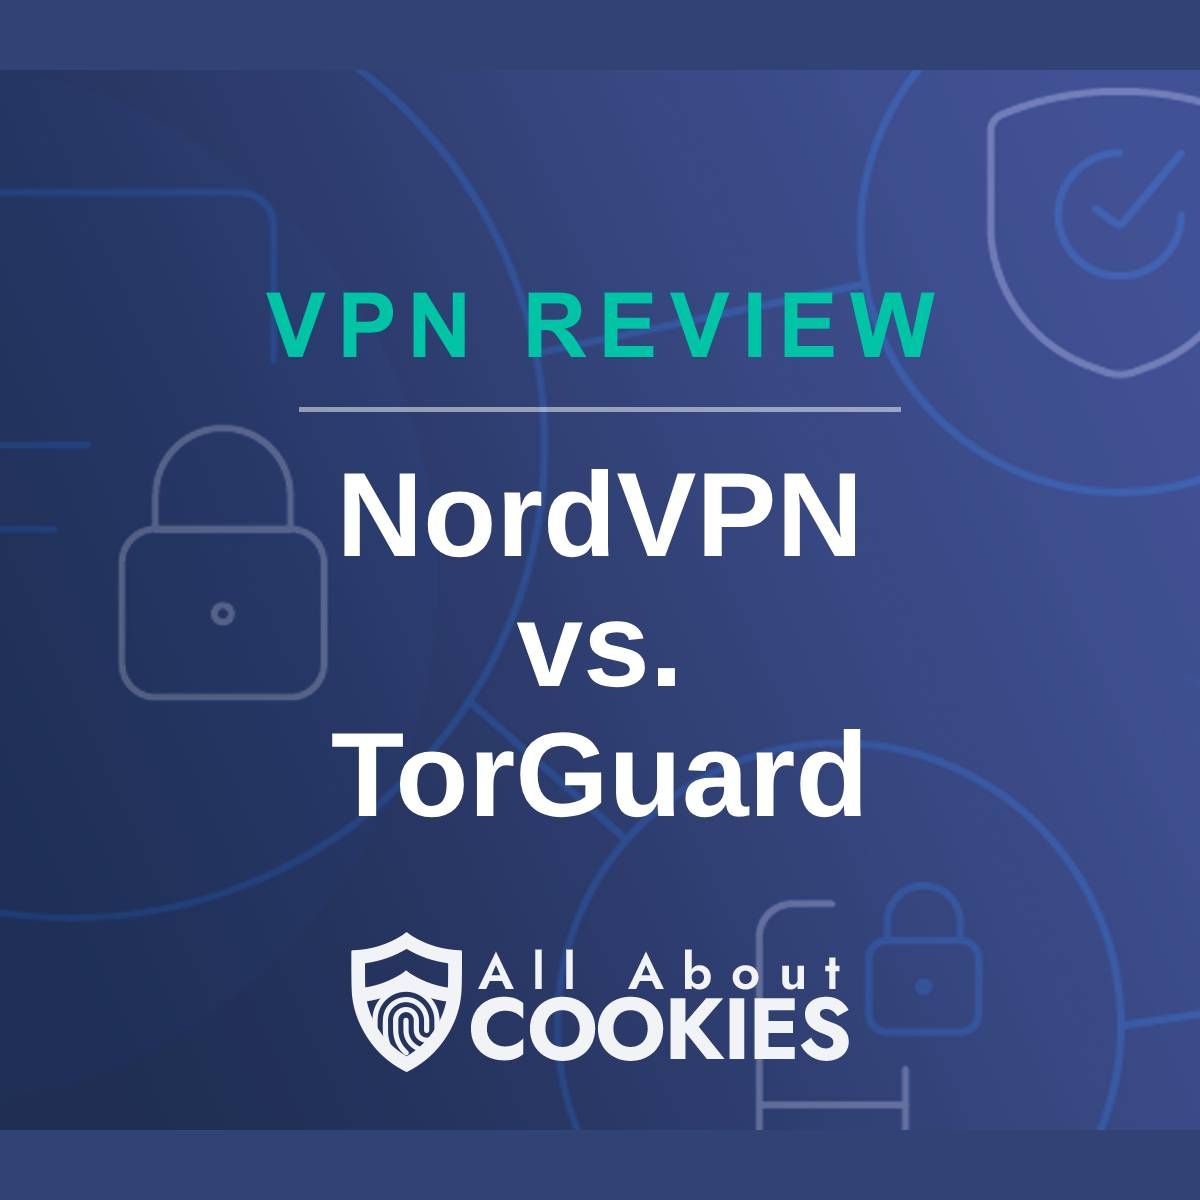 A blue background with images of locks and shields with the text &quot;NordVPN vs. TorGuard&quot; and the All About Cookies logo. 